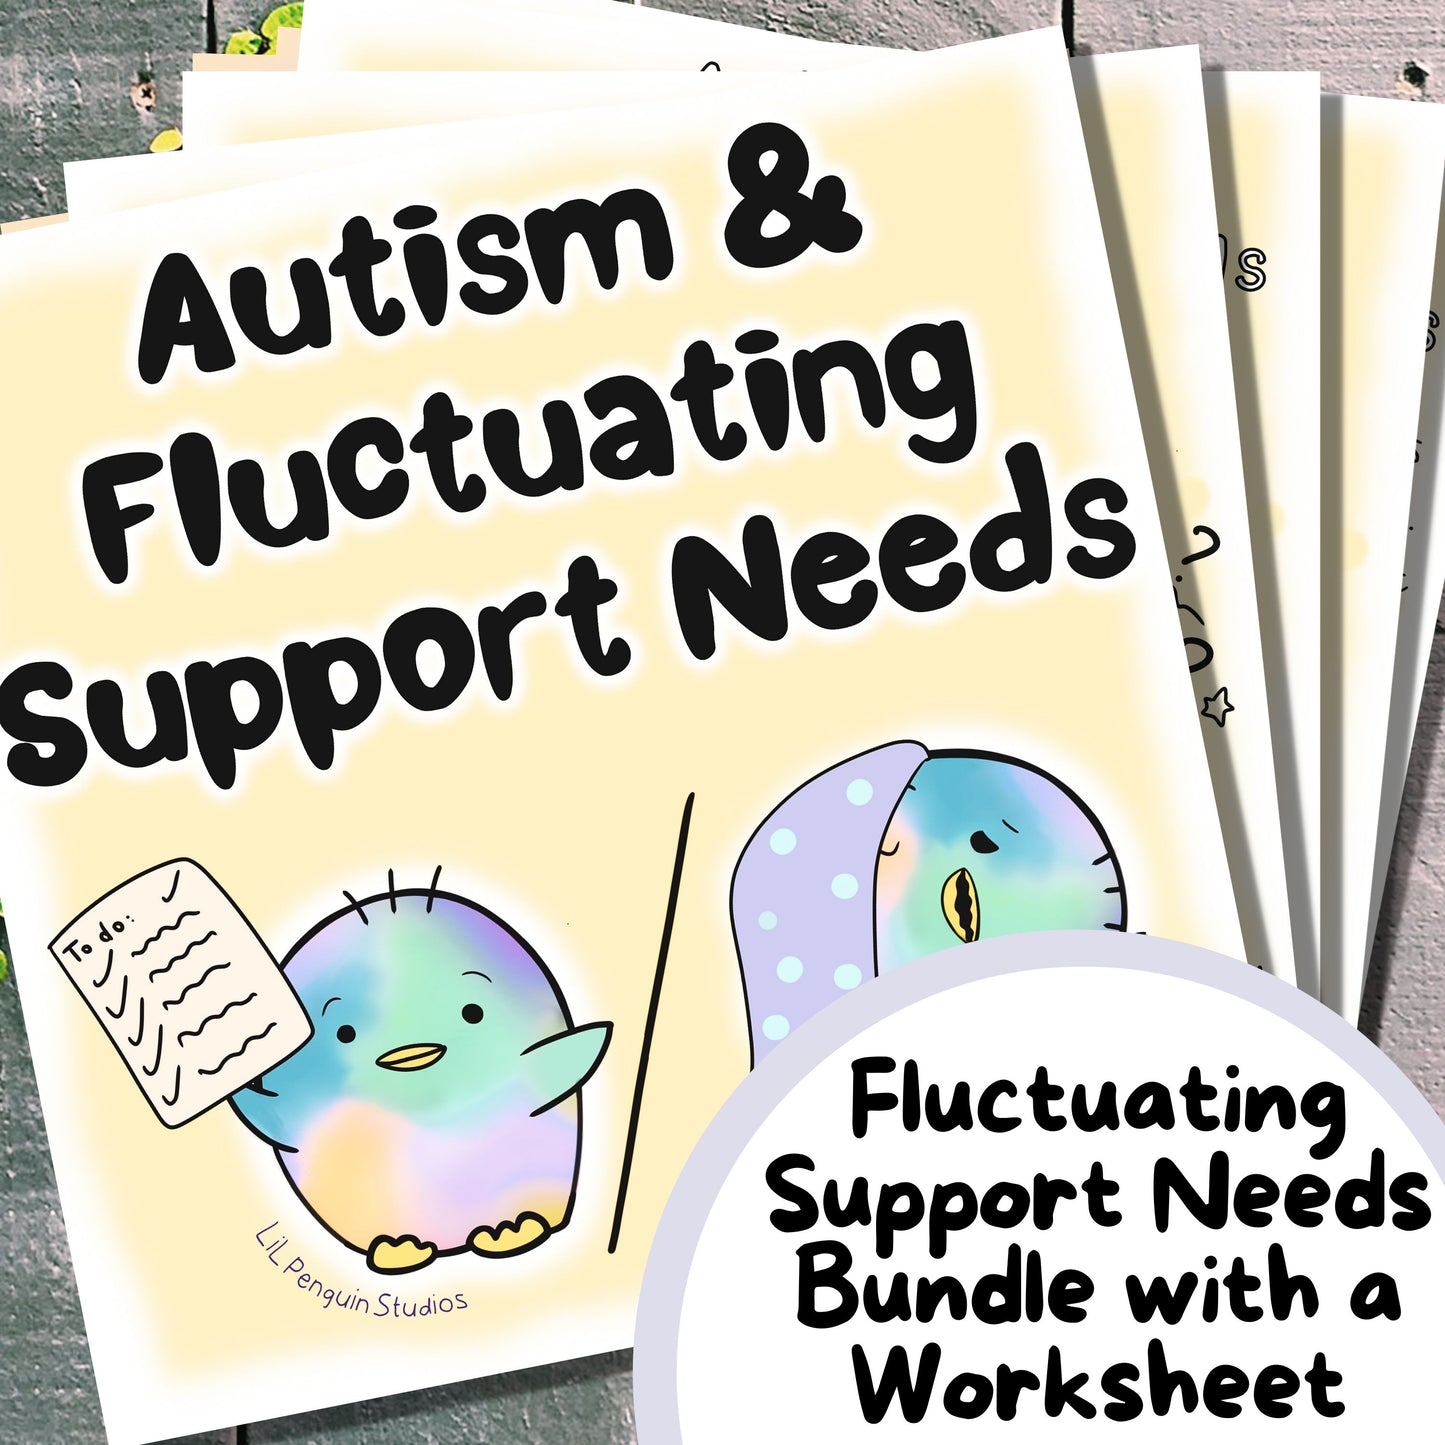 Autism and Fluctuating Support Needs Bundle with a Worksheet - Private Practice Use